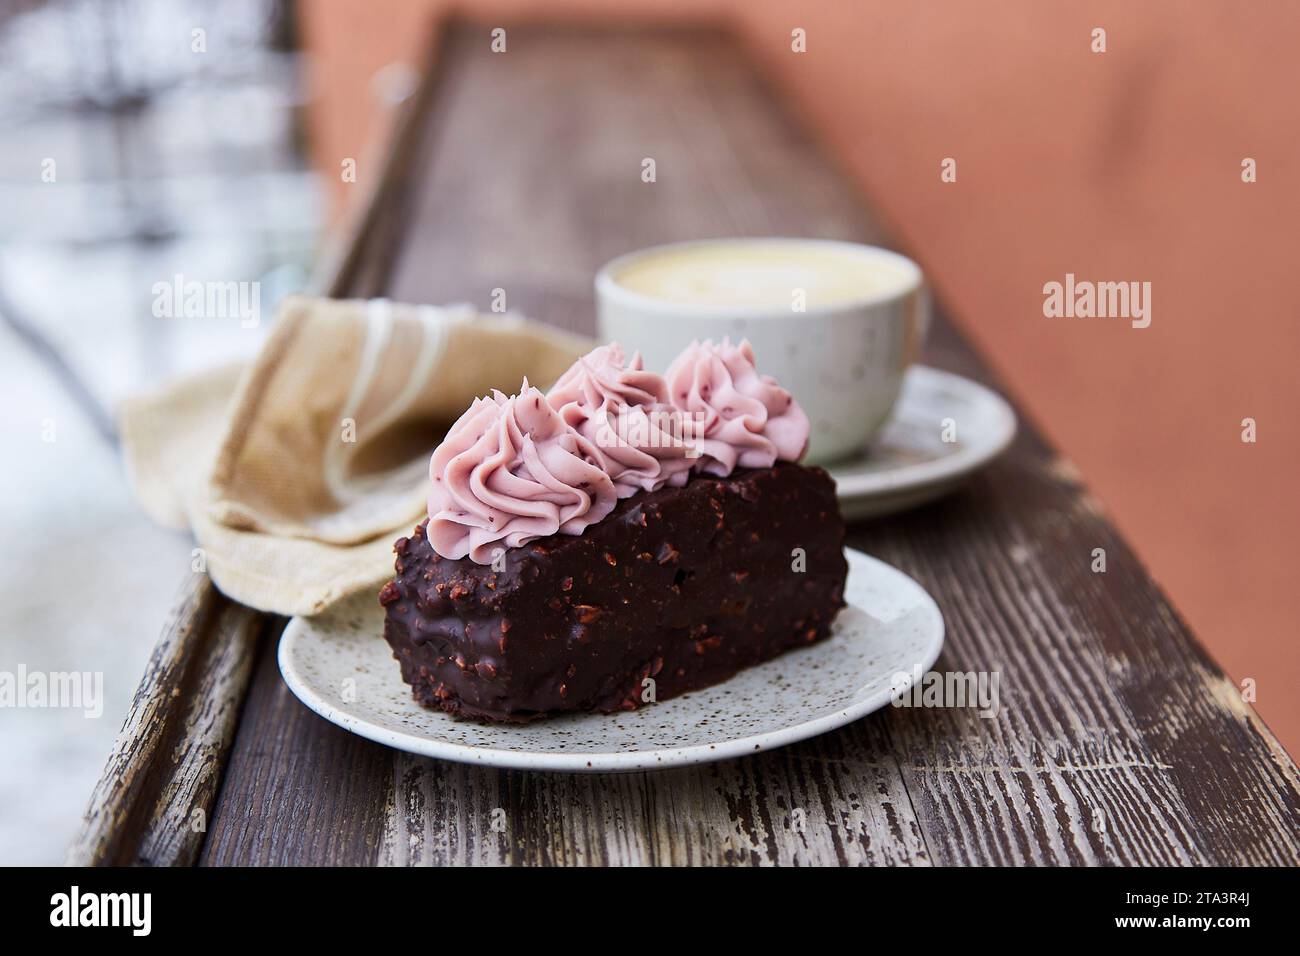 Vegan brownie cake with cup of cappuccino outdoor. Coffee with dessert. Winter aesthetics. Stock Photo